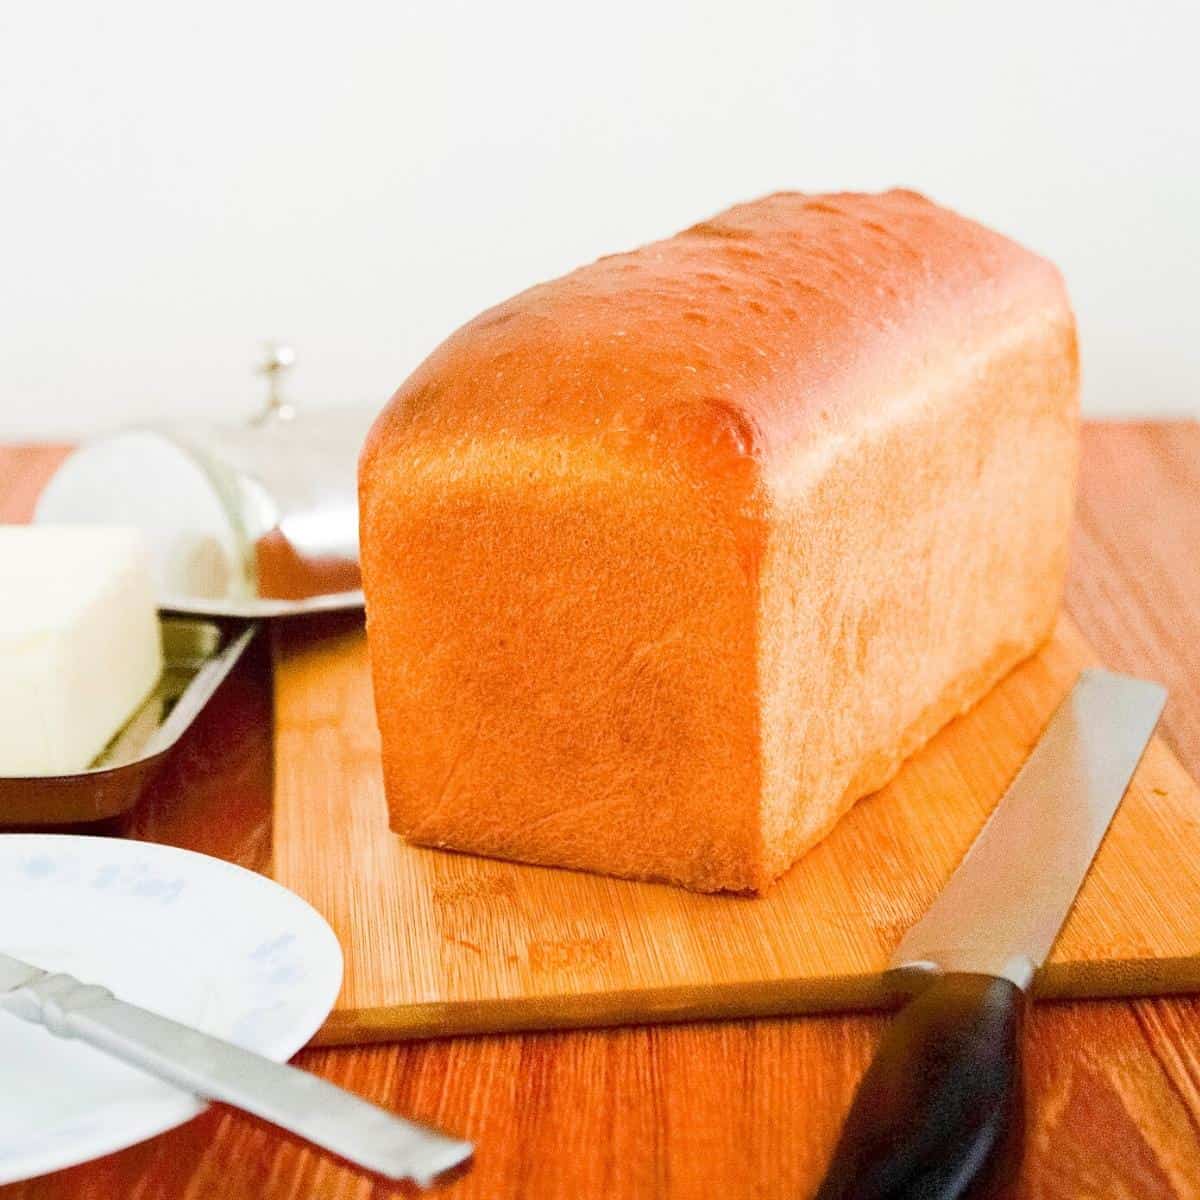 Bake bread for sandwiches on the table.